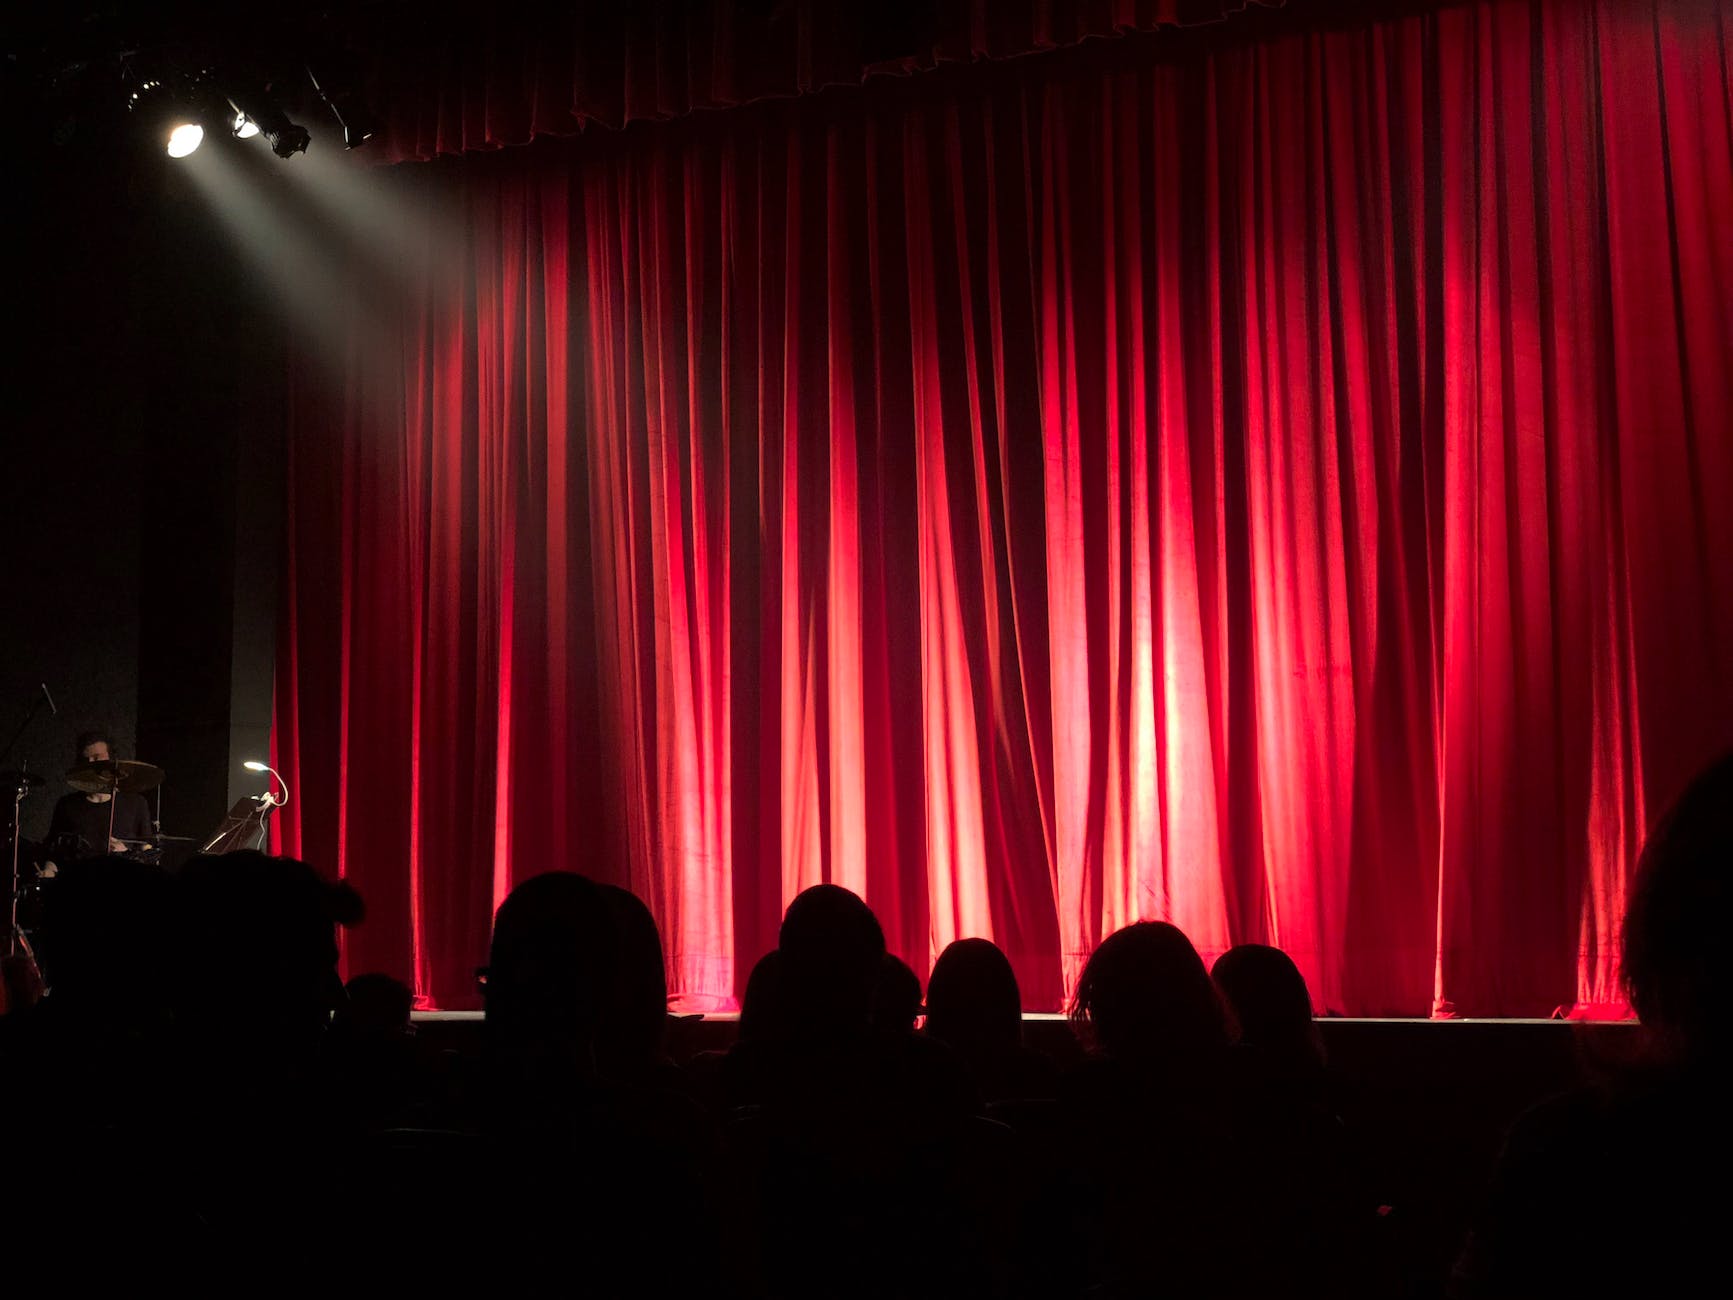 An Introvert’s Guide to Public Speaking To Apply Now